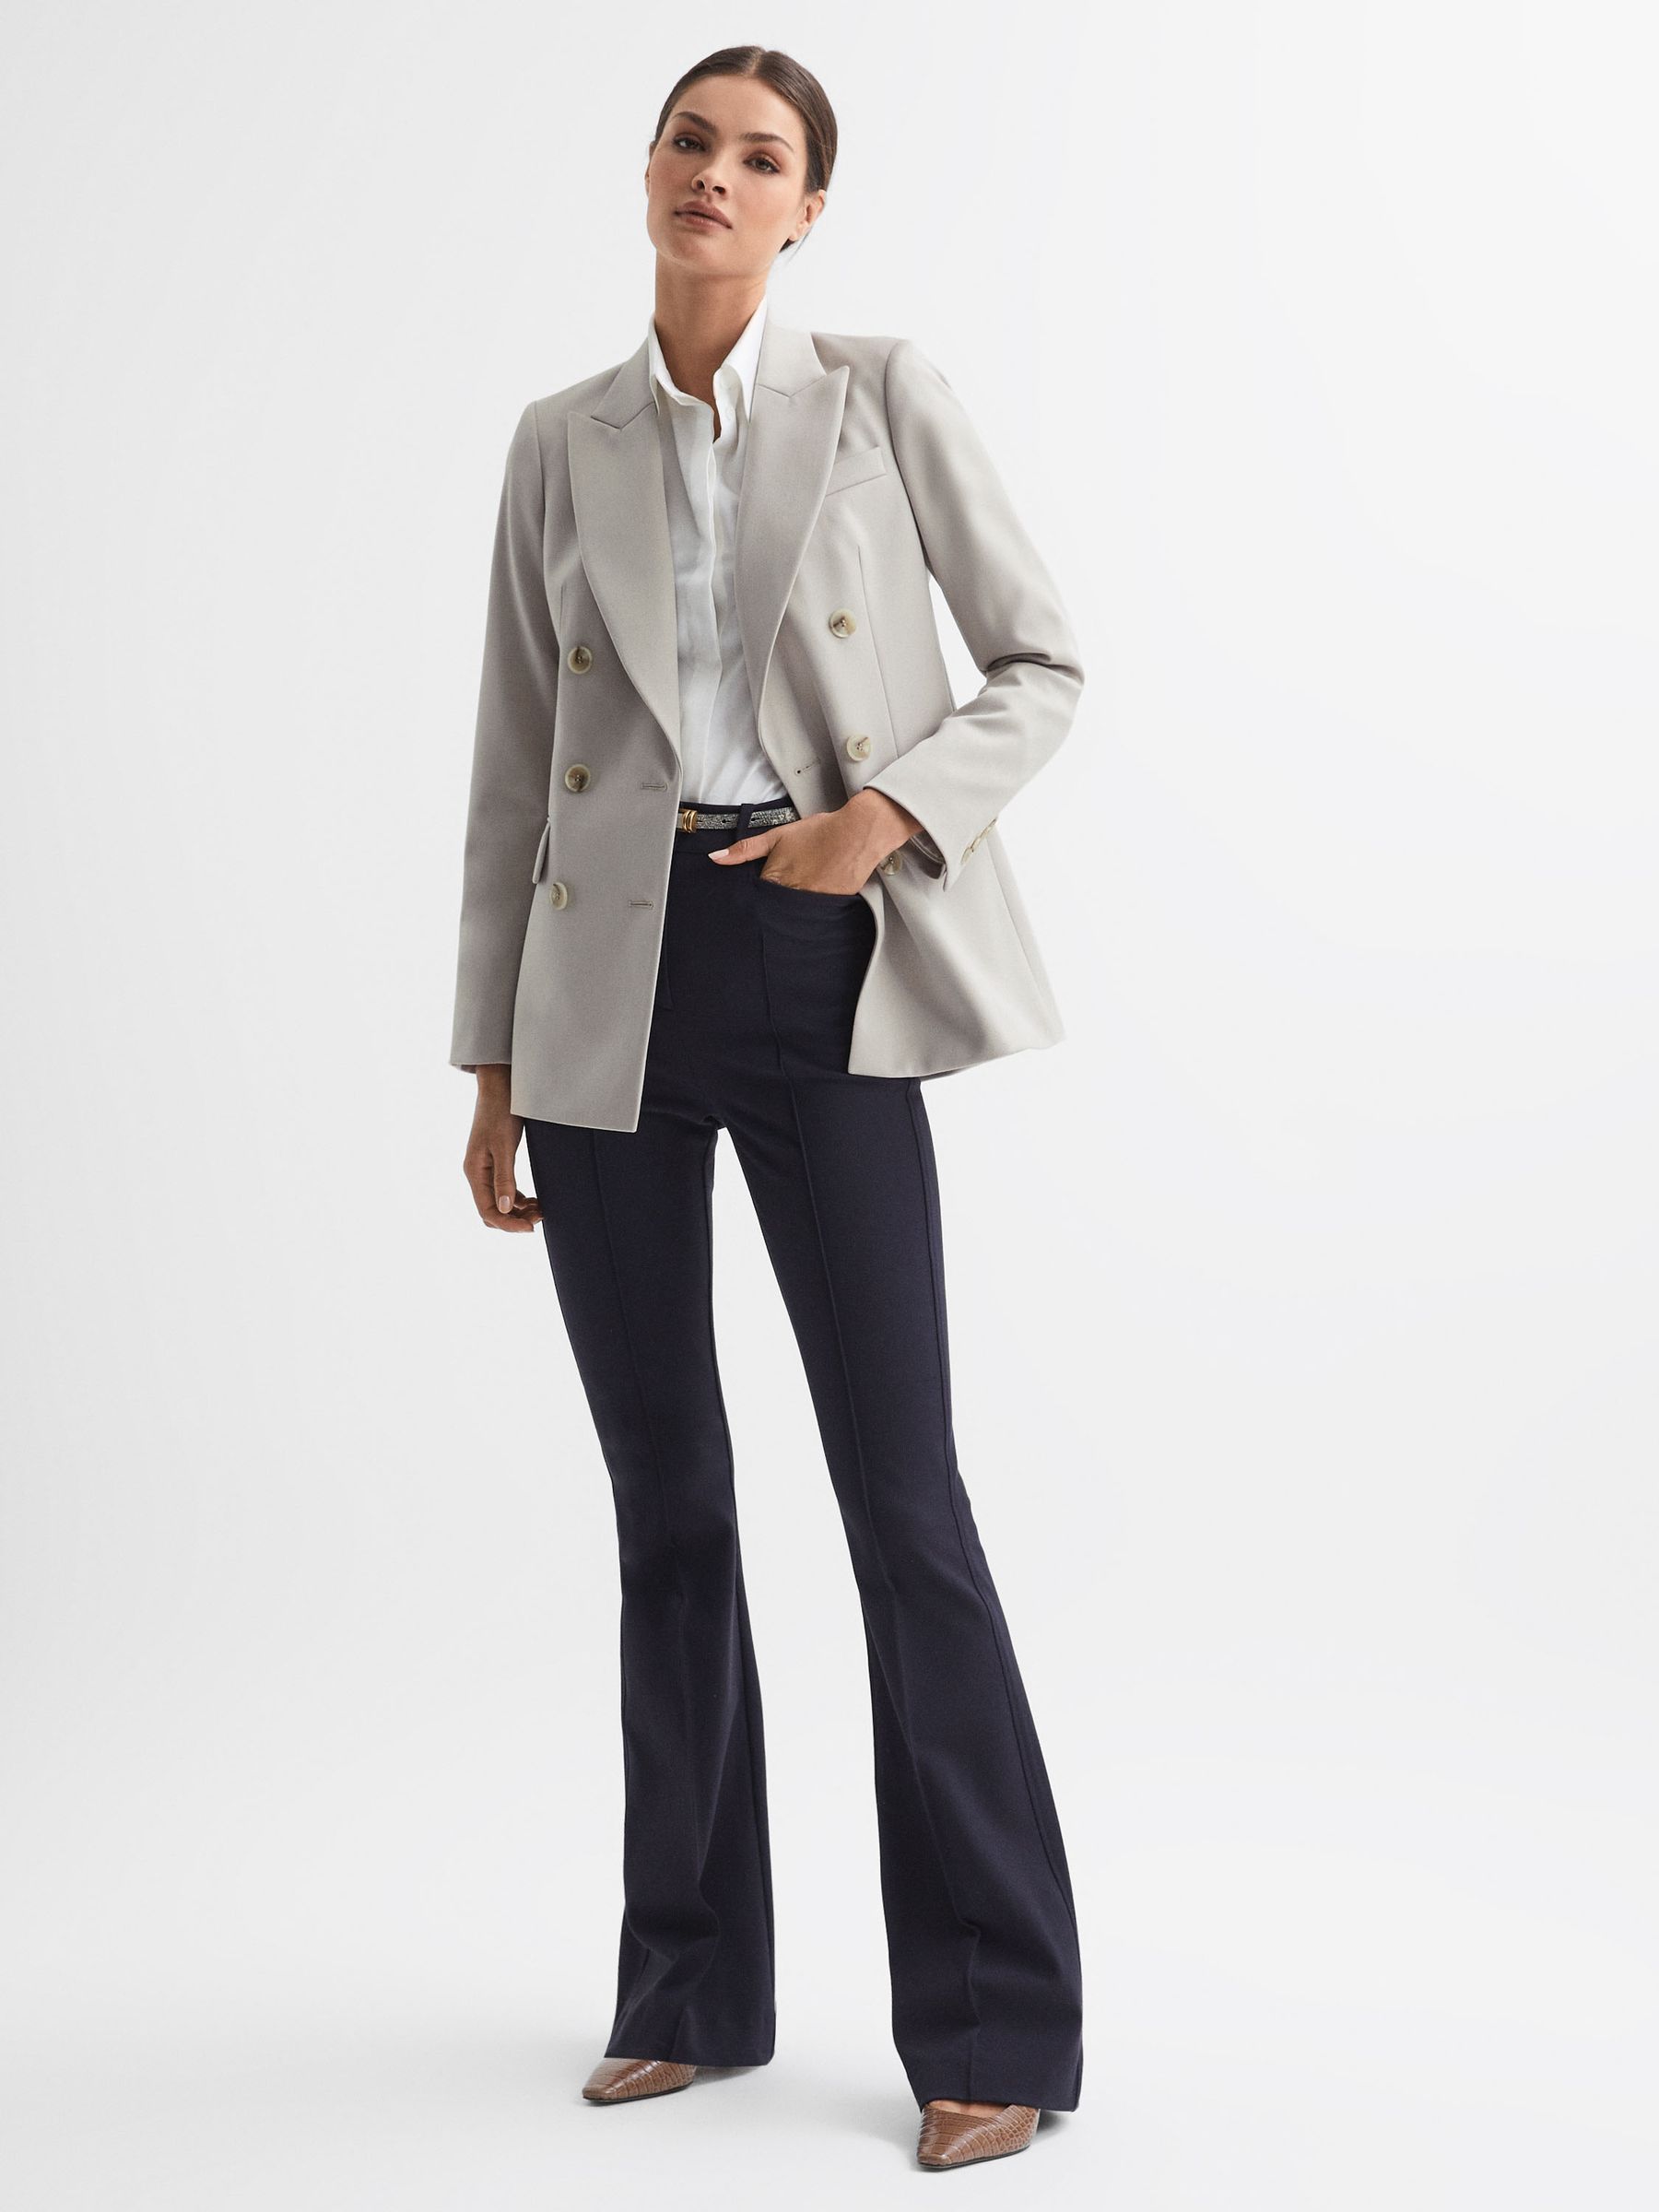 Reiss Astrid Double Breasted Wool Blend Blazer | REISS USA